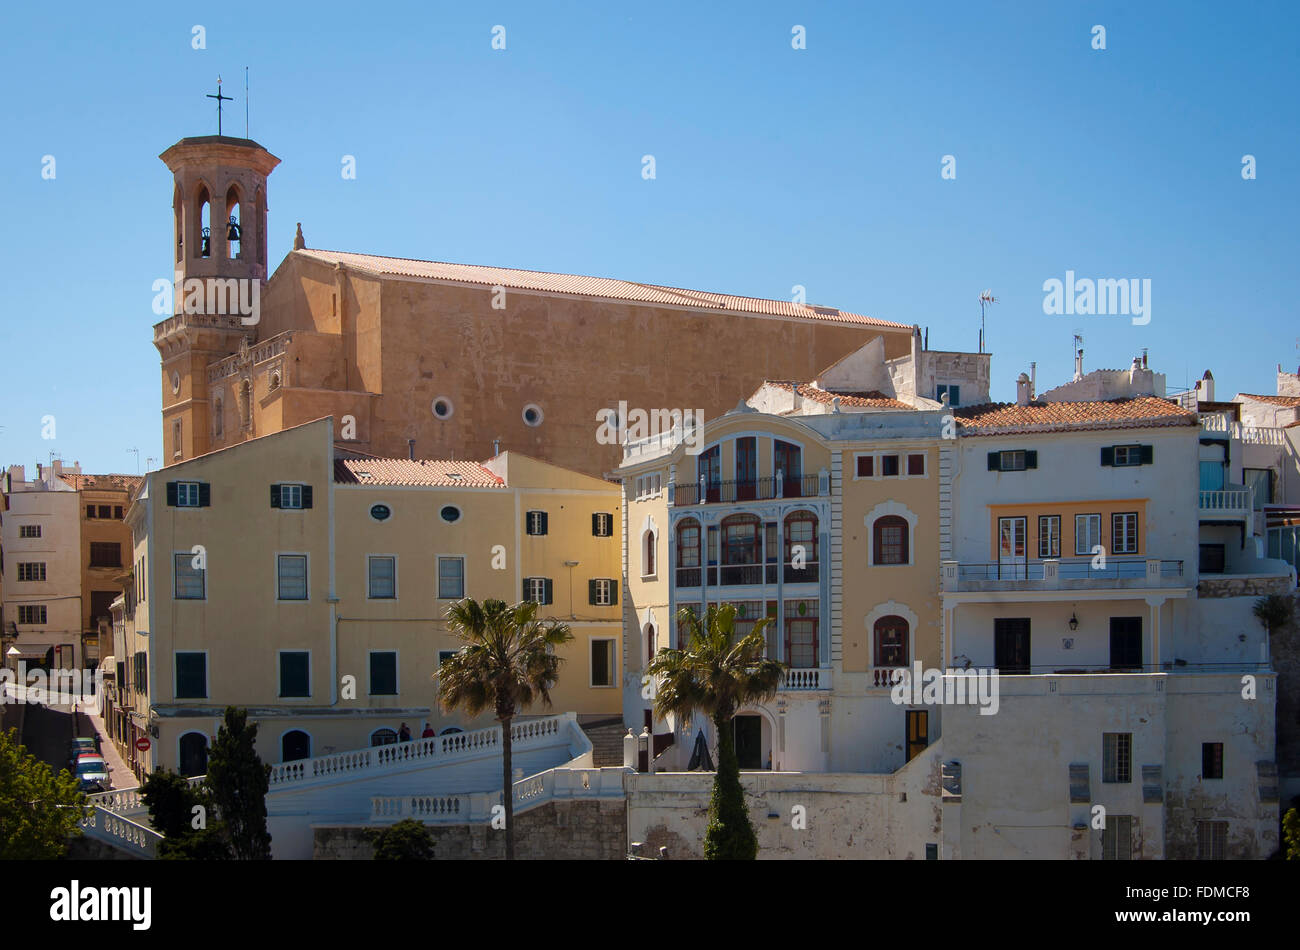 Building in the Old Town, Mahon, Menorca, Spain Stock Photo